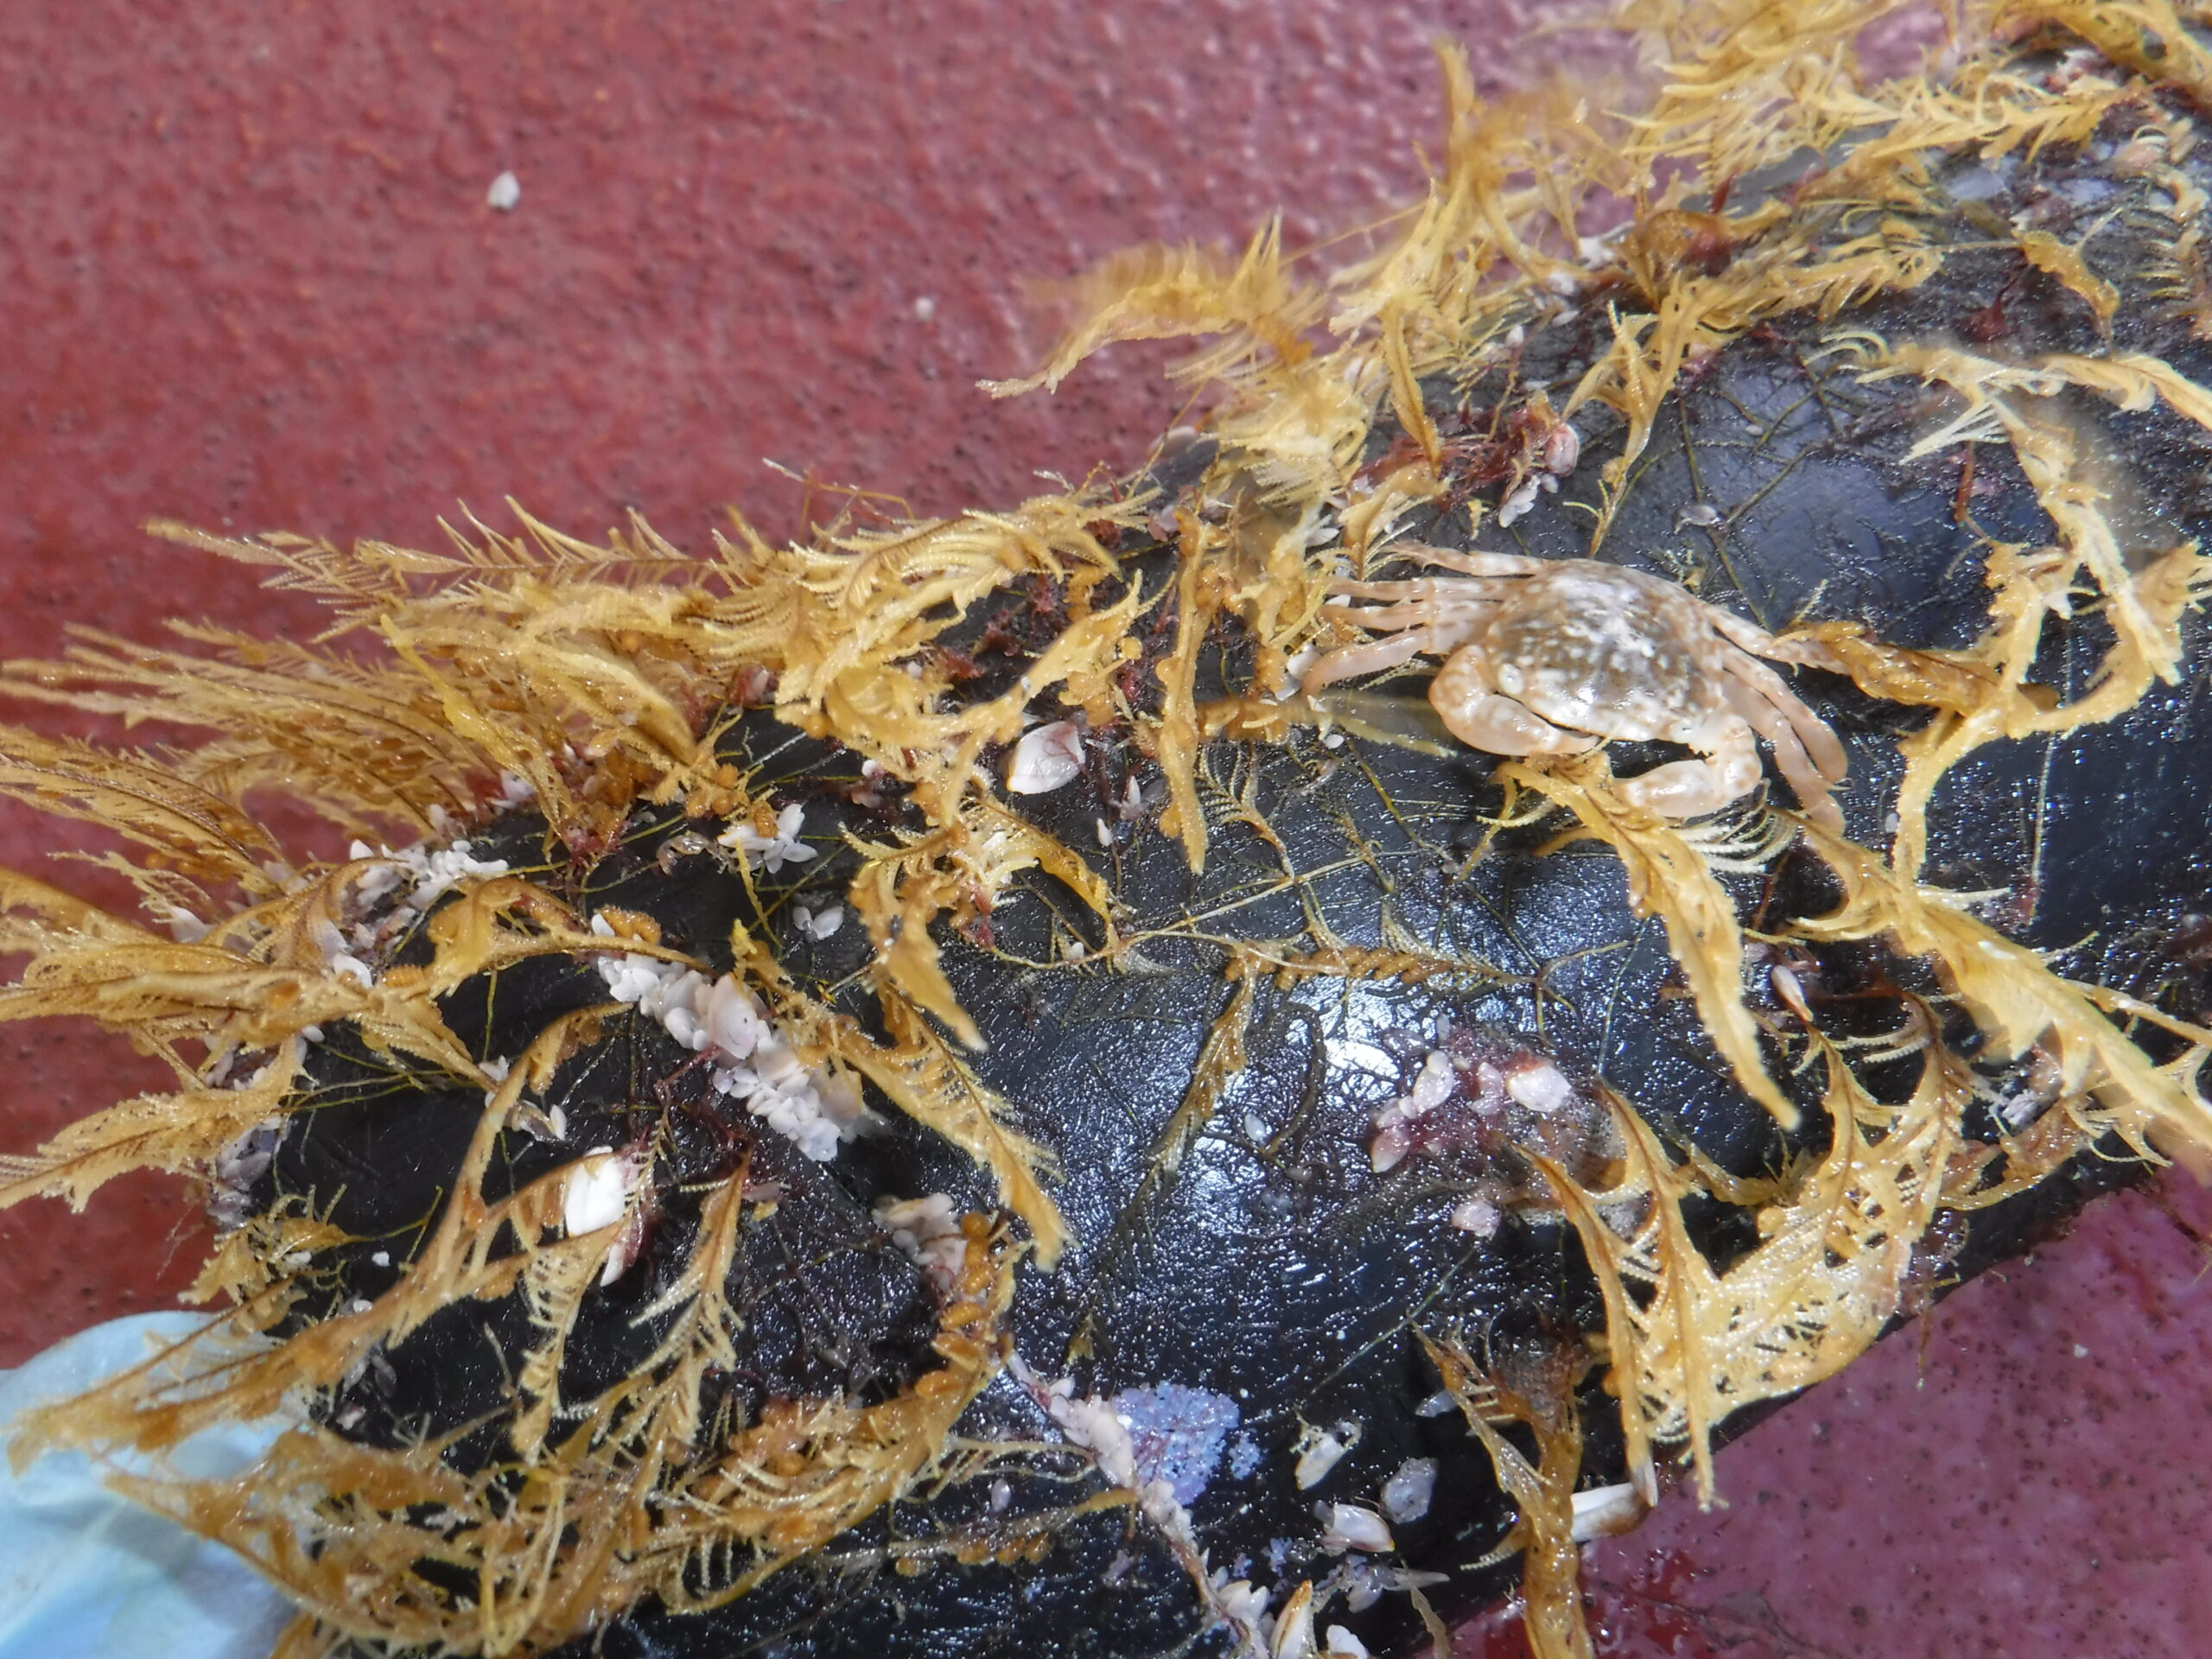 Feather-like coastal species of animals called hydroids join an open-ocean crab and gooseneck barnacles on a piece of floating debris.